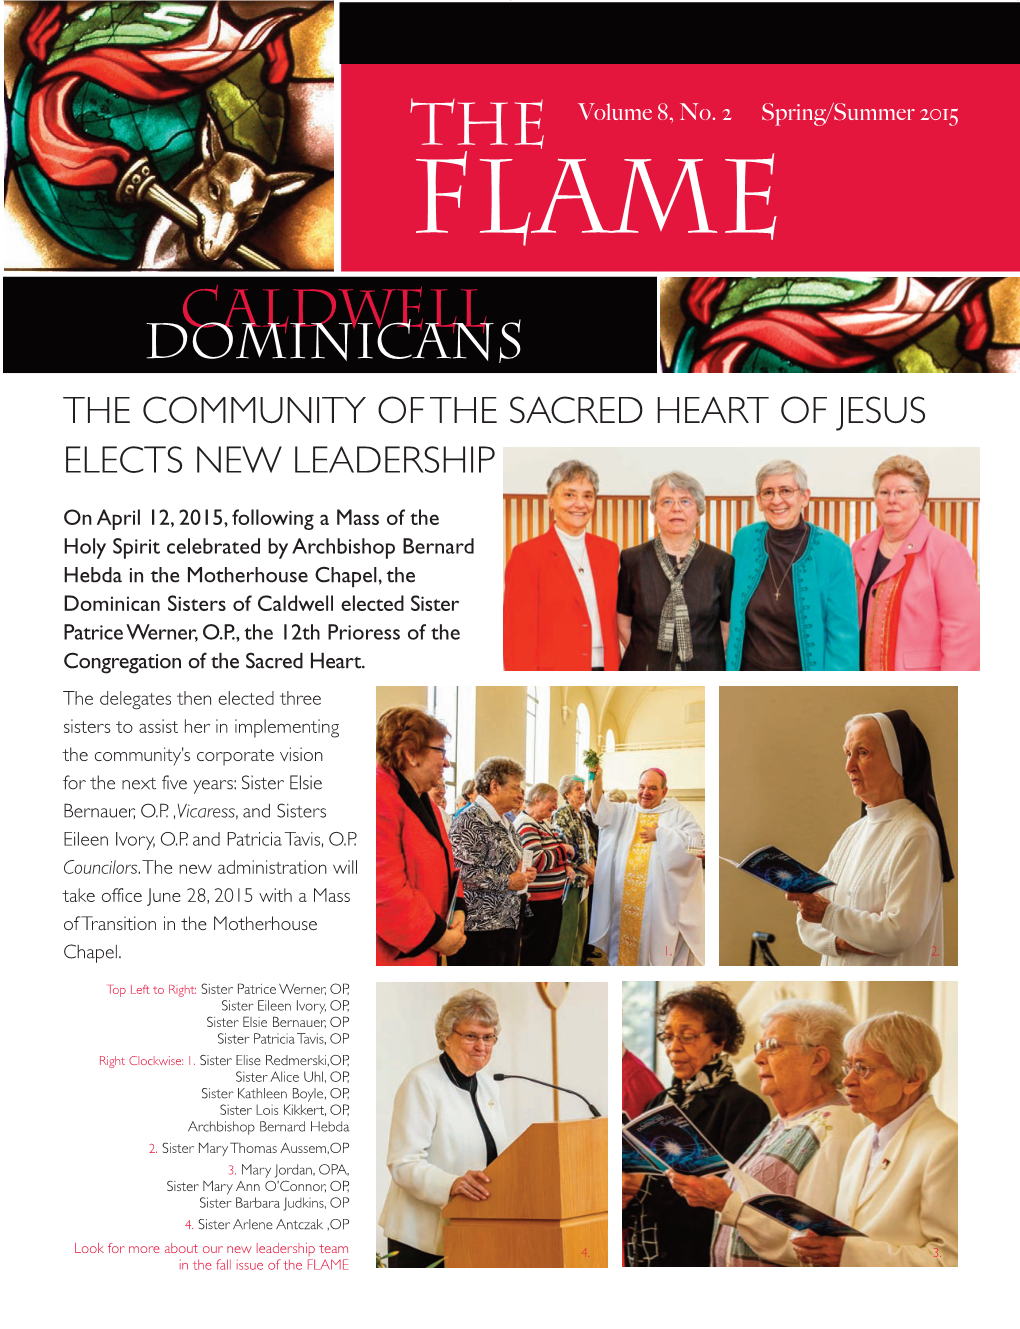 Spring/Summer 2015 FLAME CALDWELL DOMINICANS the COMMUNITY of the SACRED HEART of JESUS ELECTS NEW LEADERSHIP